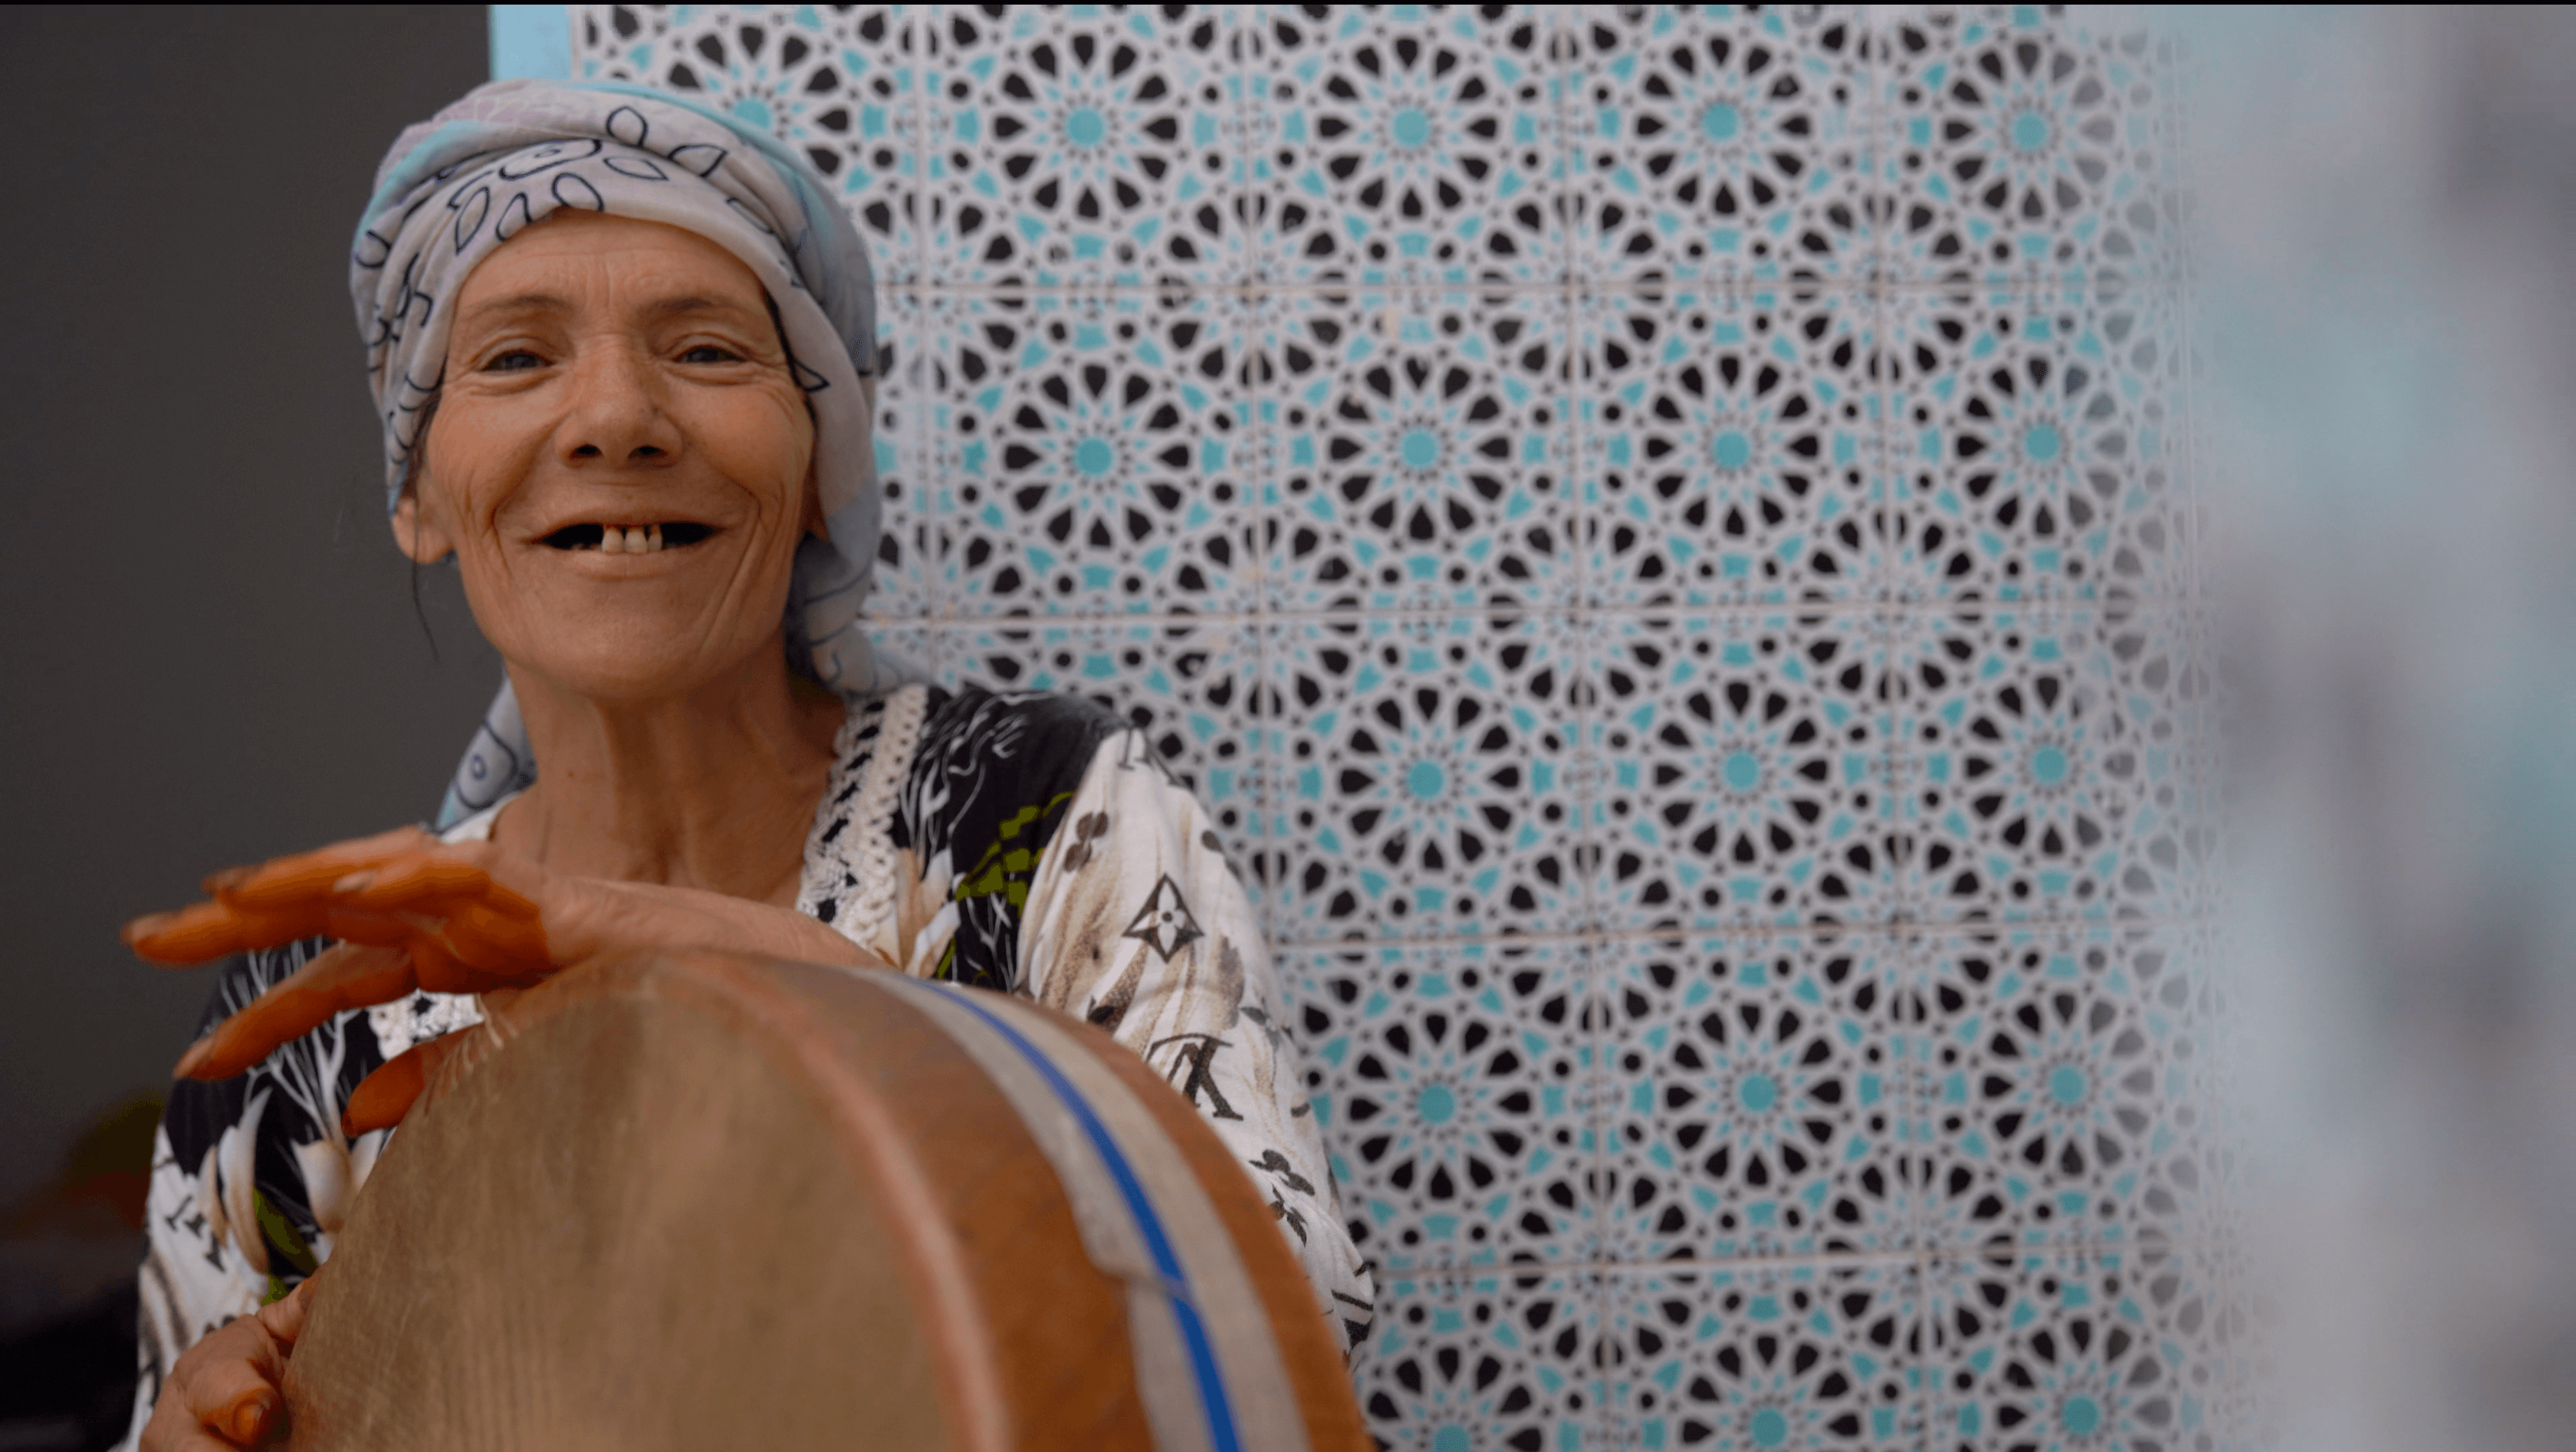 Still from Machtat. A woman in a headwrap smiles at the camera, while she plays a drum.